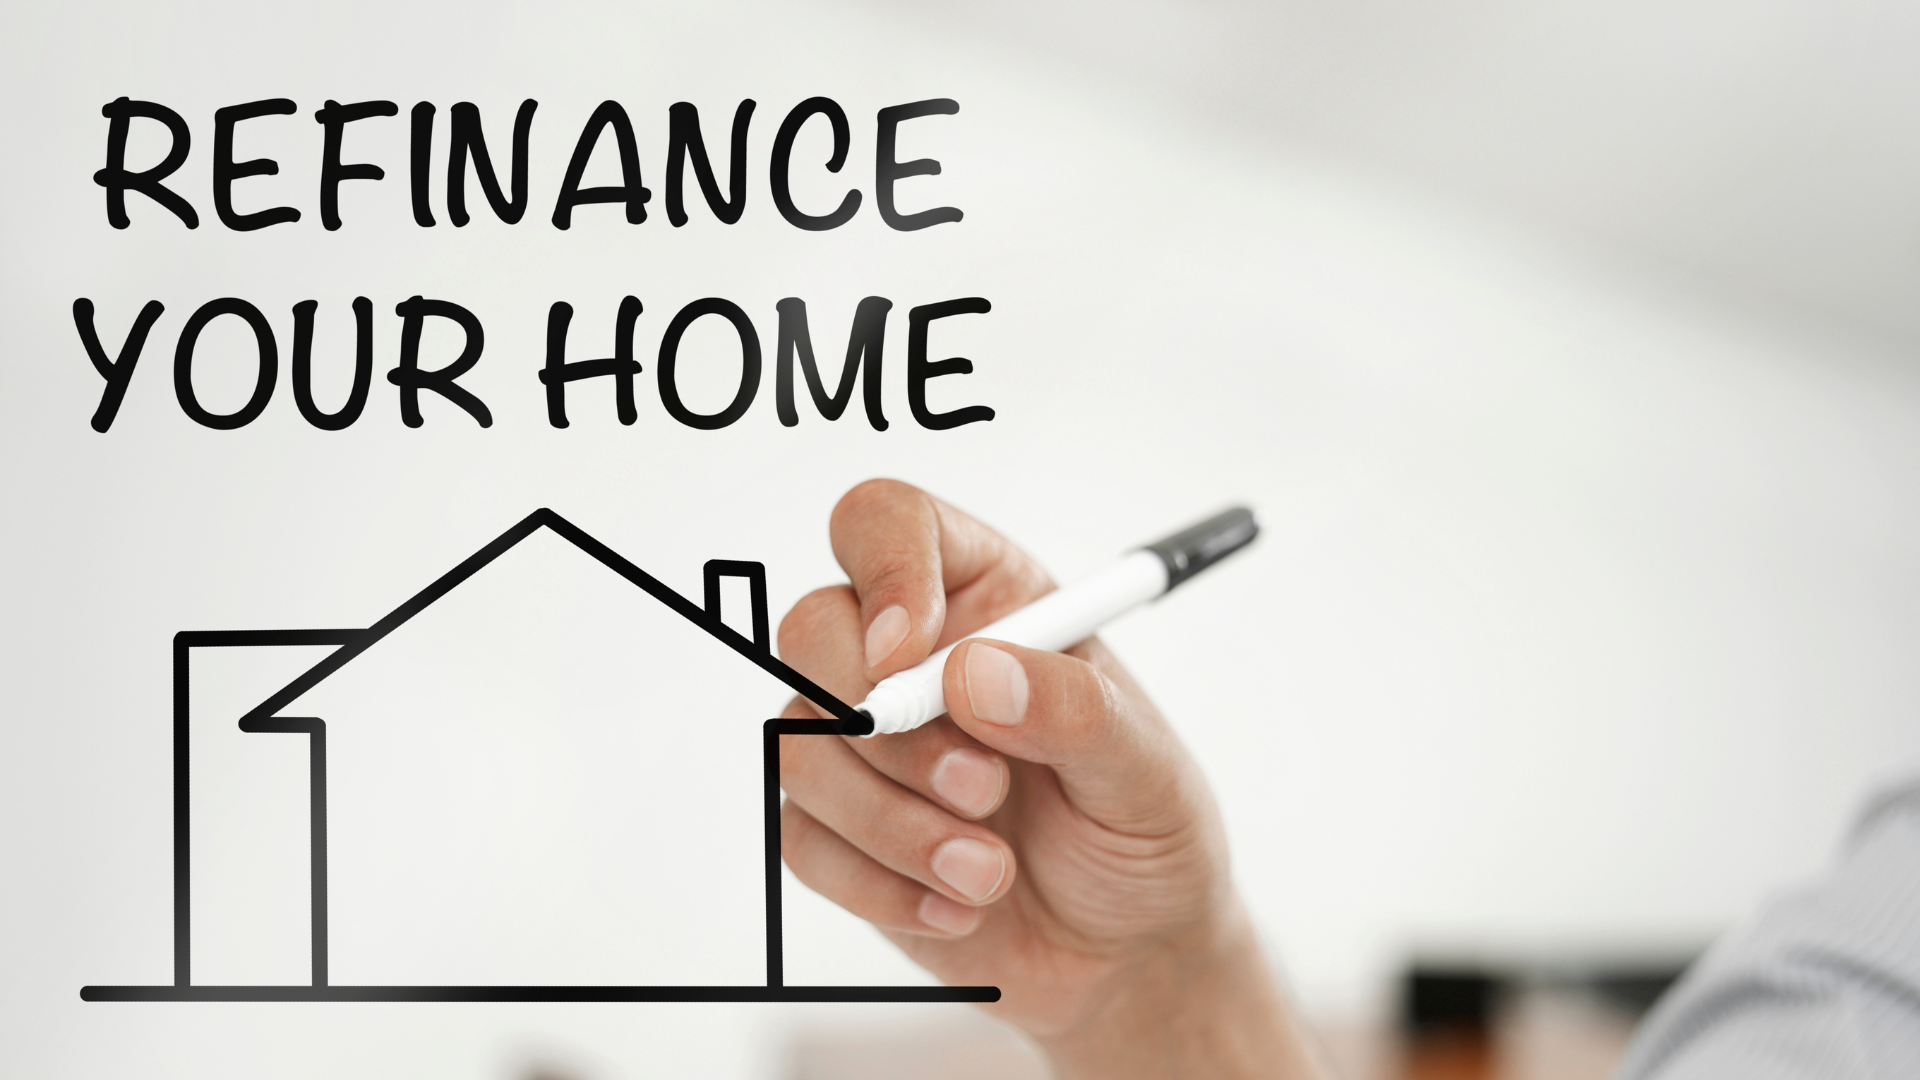 What Is A Limited Cash-Out Refinance?